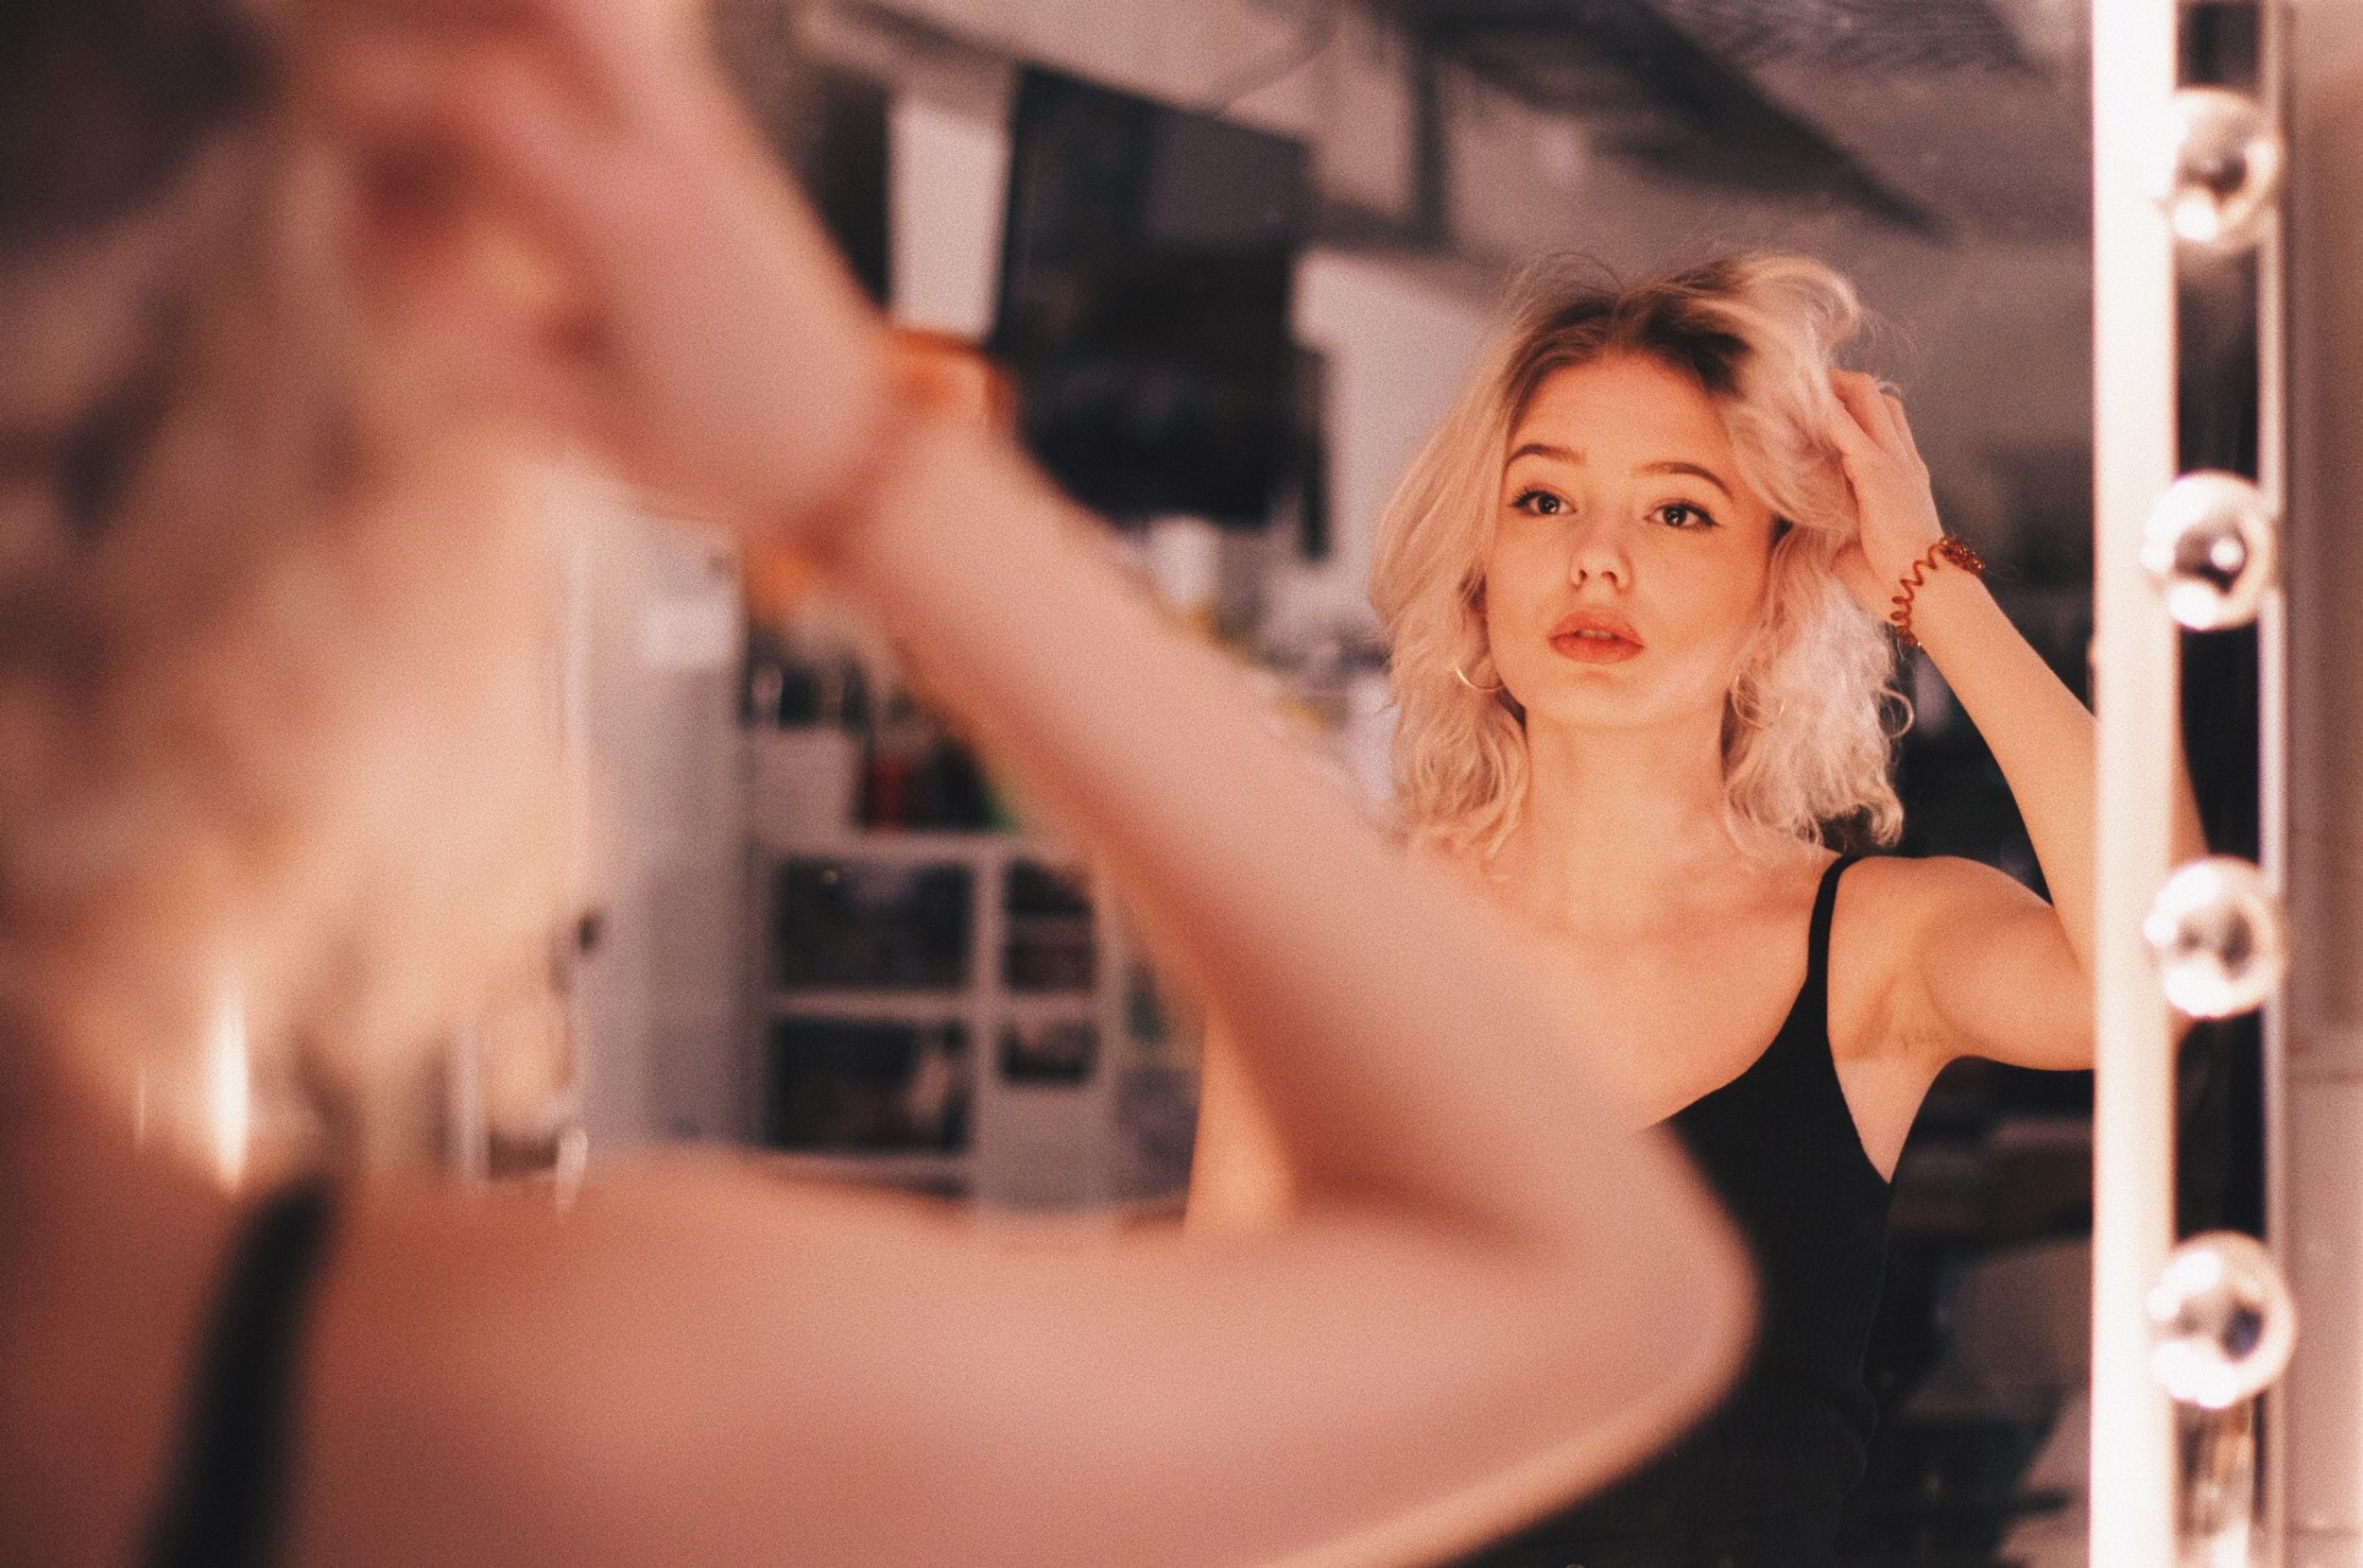 7 Mantras To Tell Yourself When You're Recovering From An 'Almost' Relationship